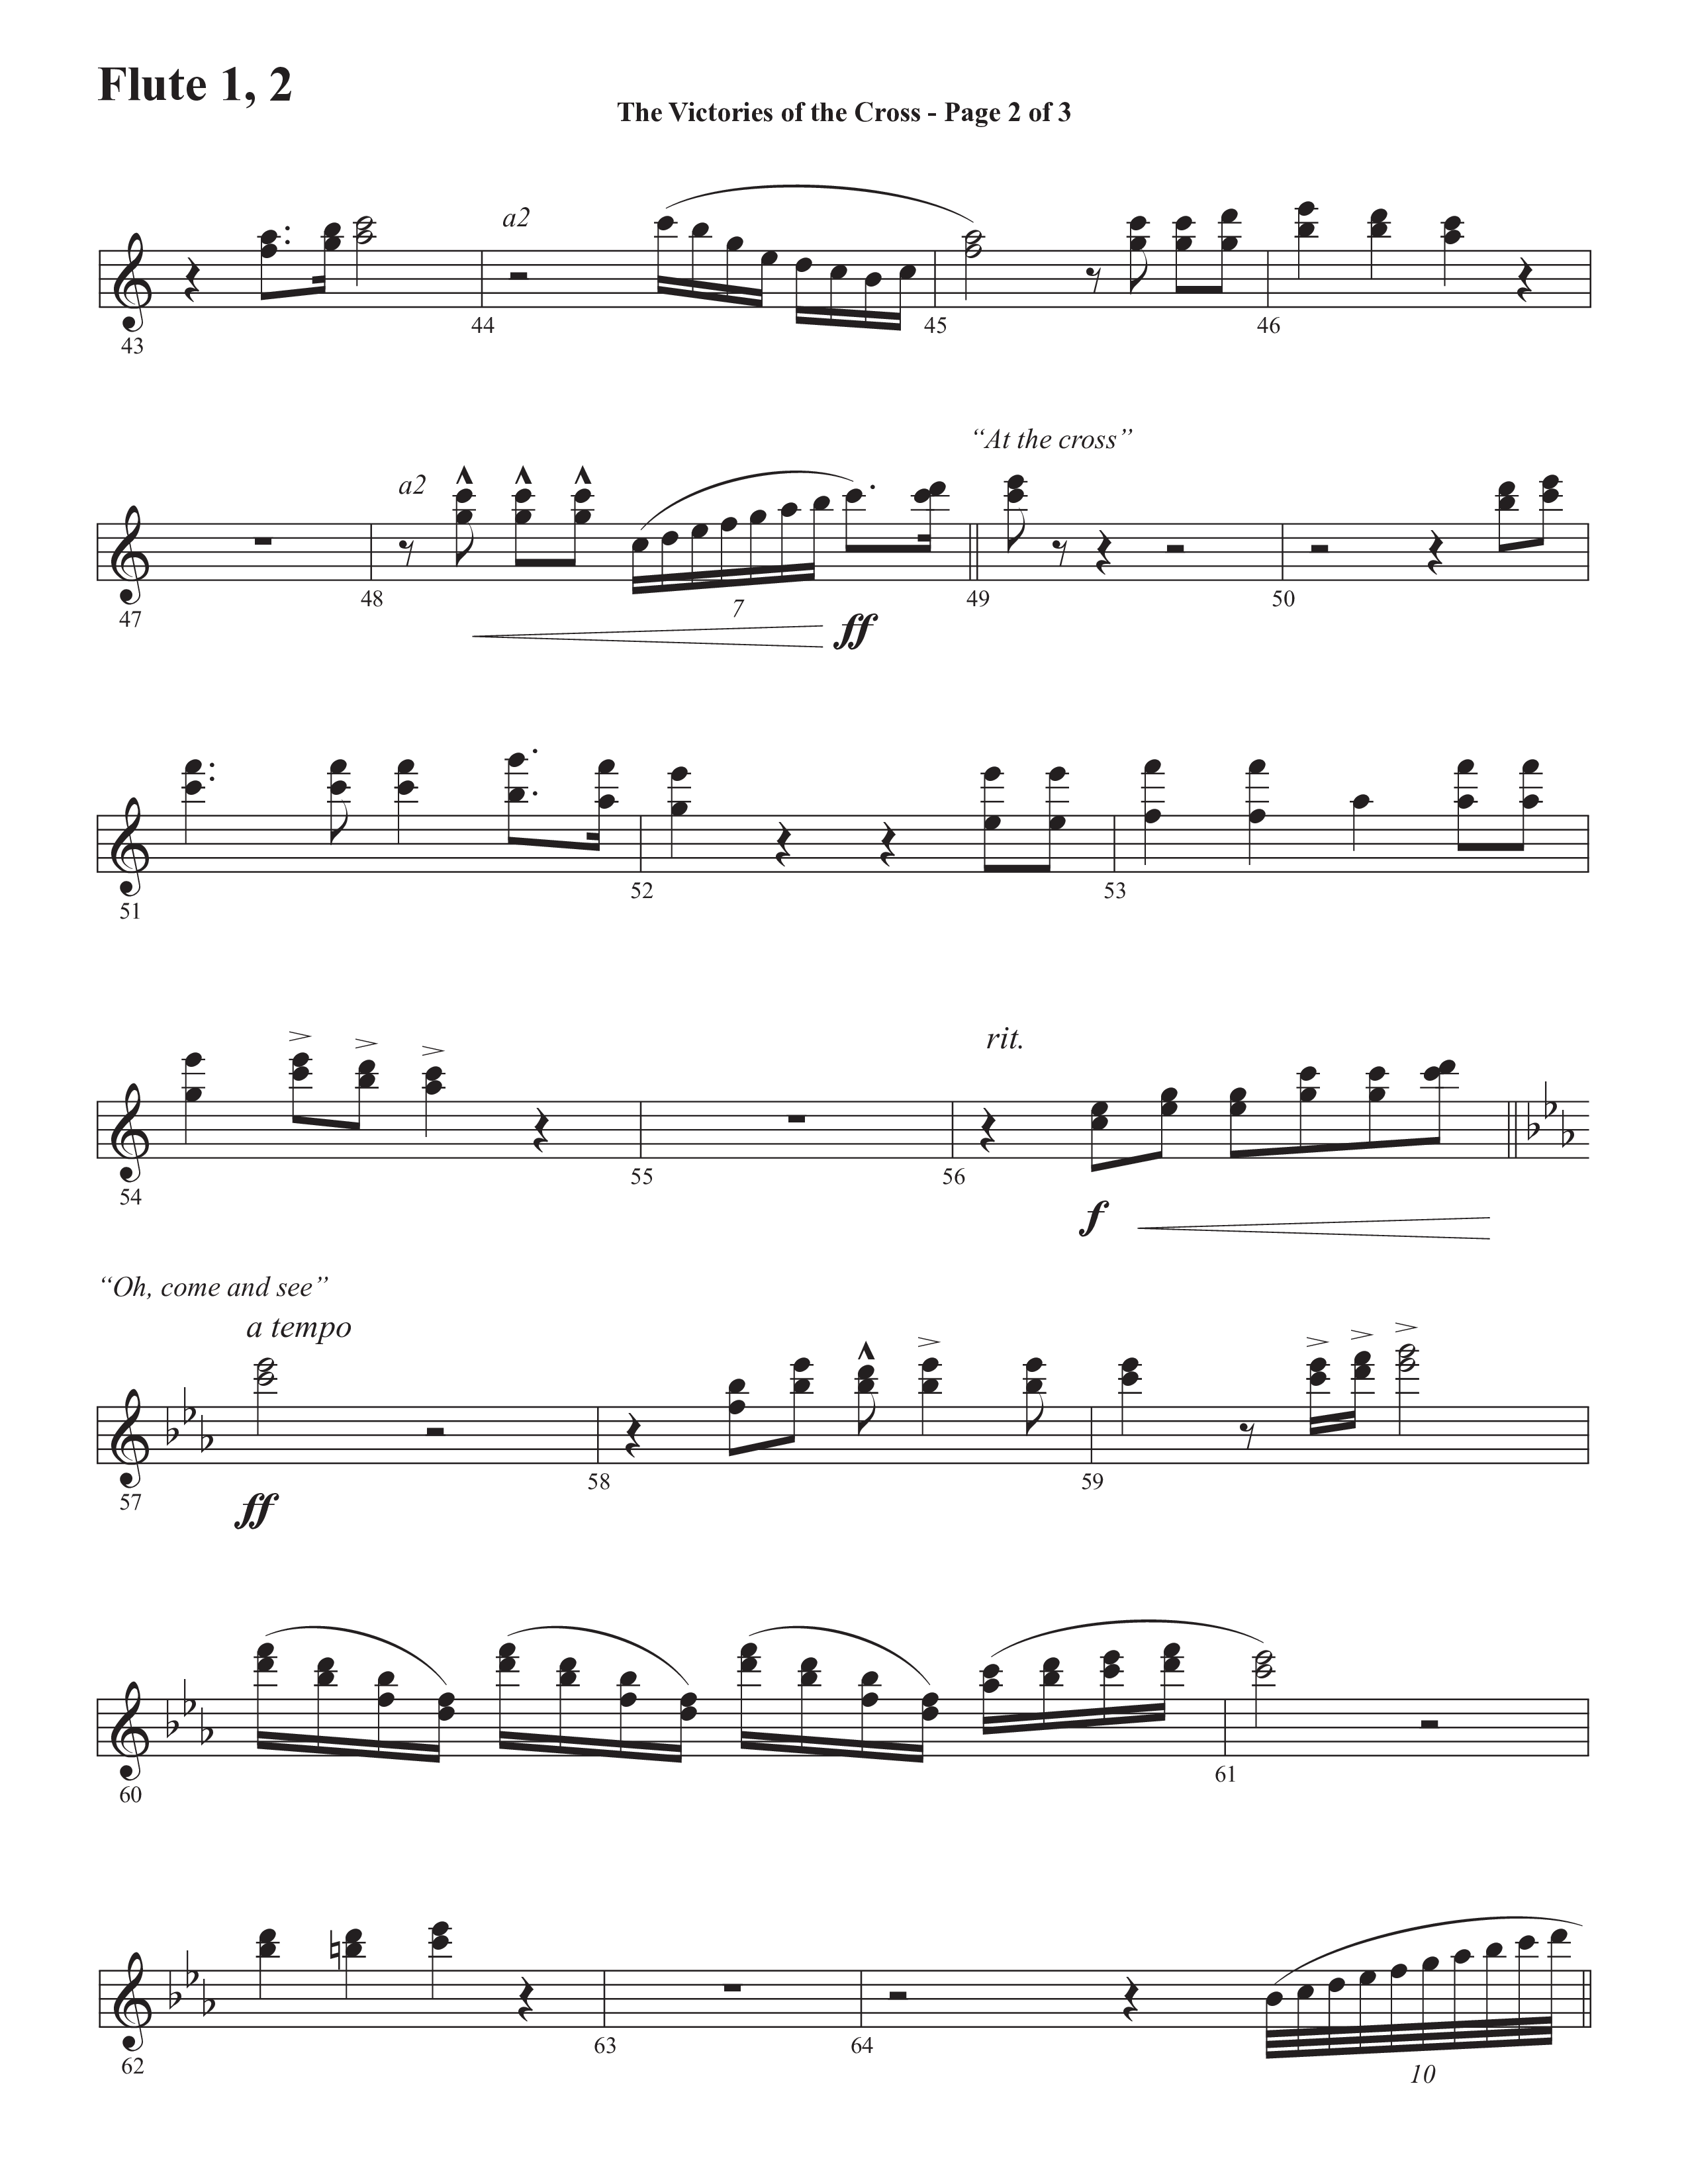 The Victories Of The Cross (with At The Cross) (Choral Anthem SATB) Flute 1/2 (Semsen Music / Arr. Daniel Semsen)